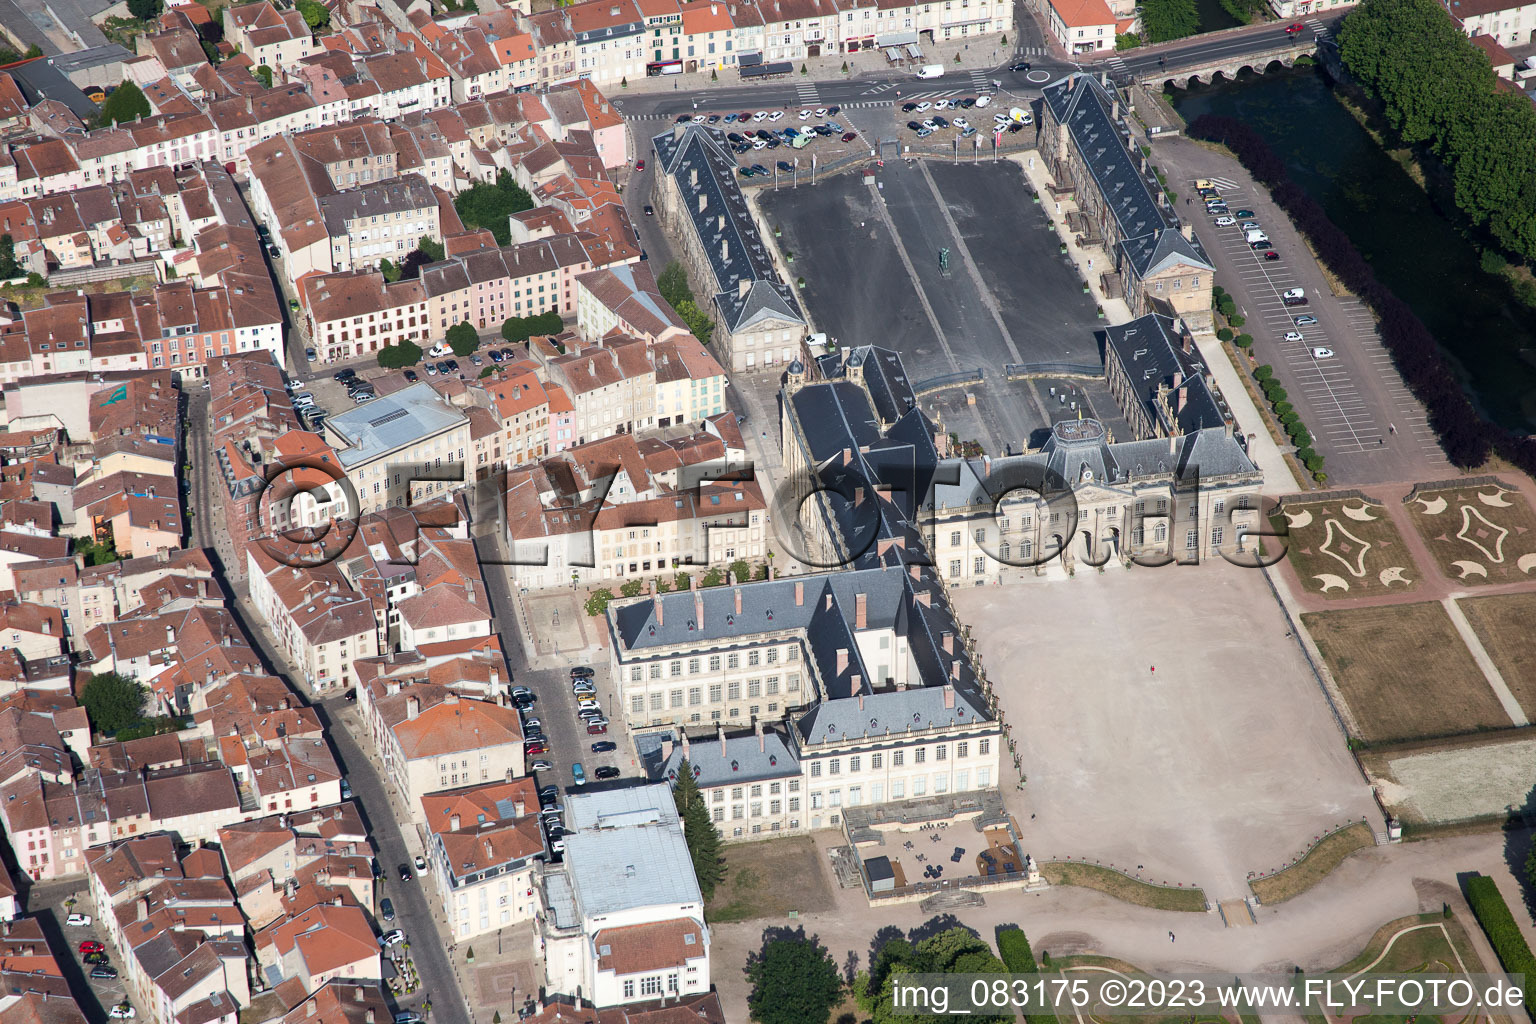 Bird's eye view of Lunéville in the state Meurthe et Moselle, France